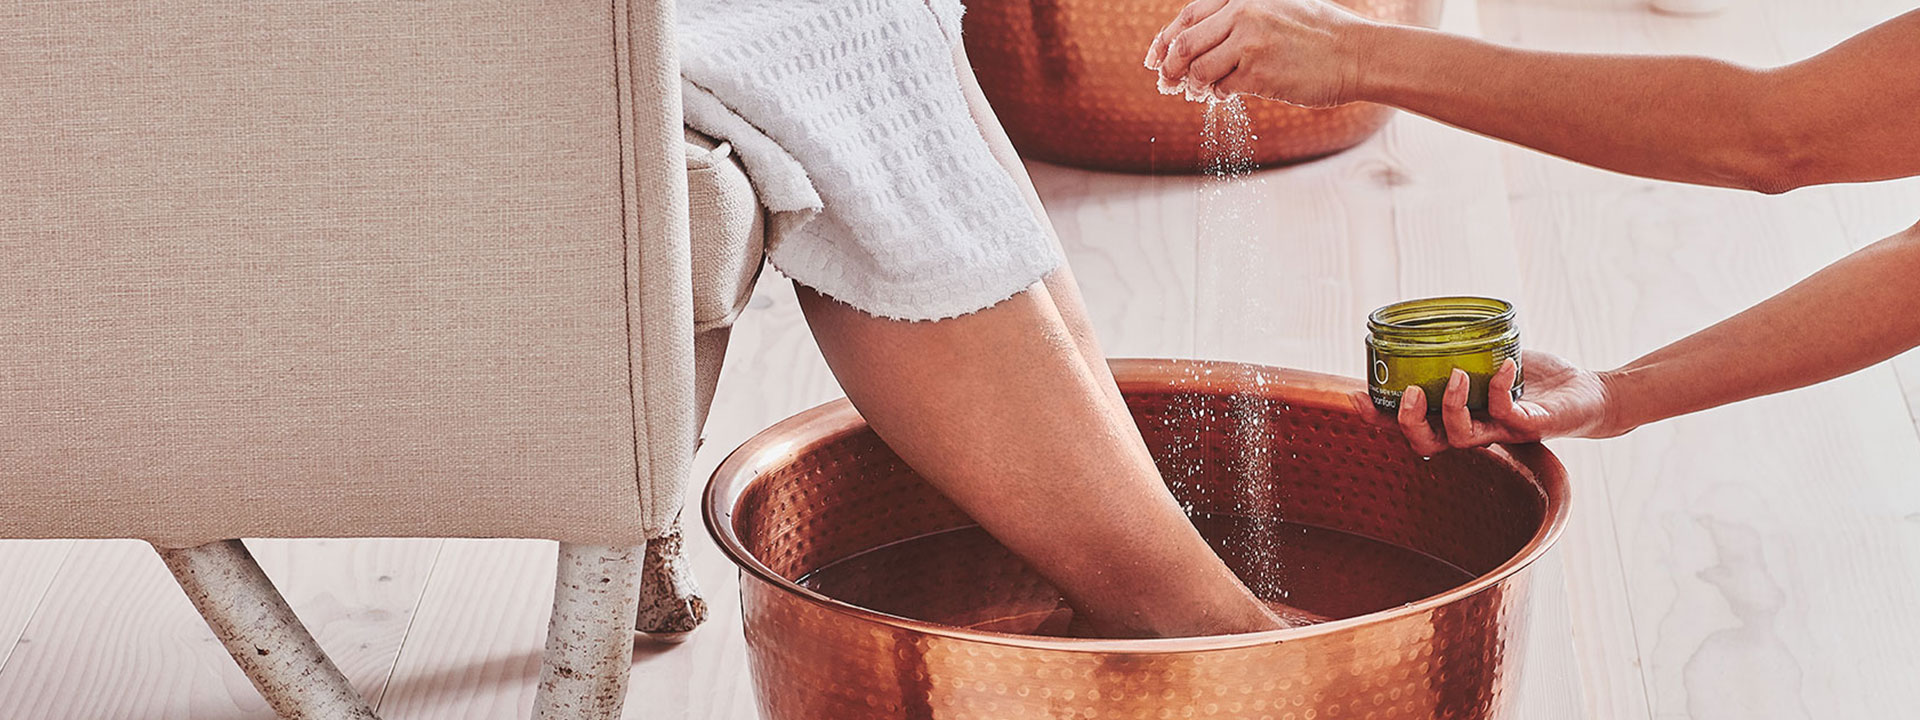 Pedicure process at Bamford Wellness Spa, with aromatic footbath and exfoliation.